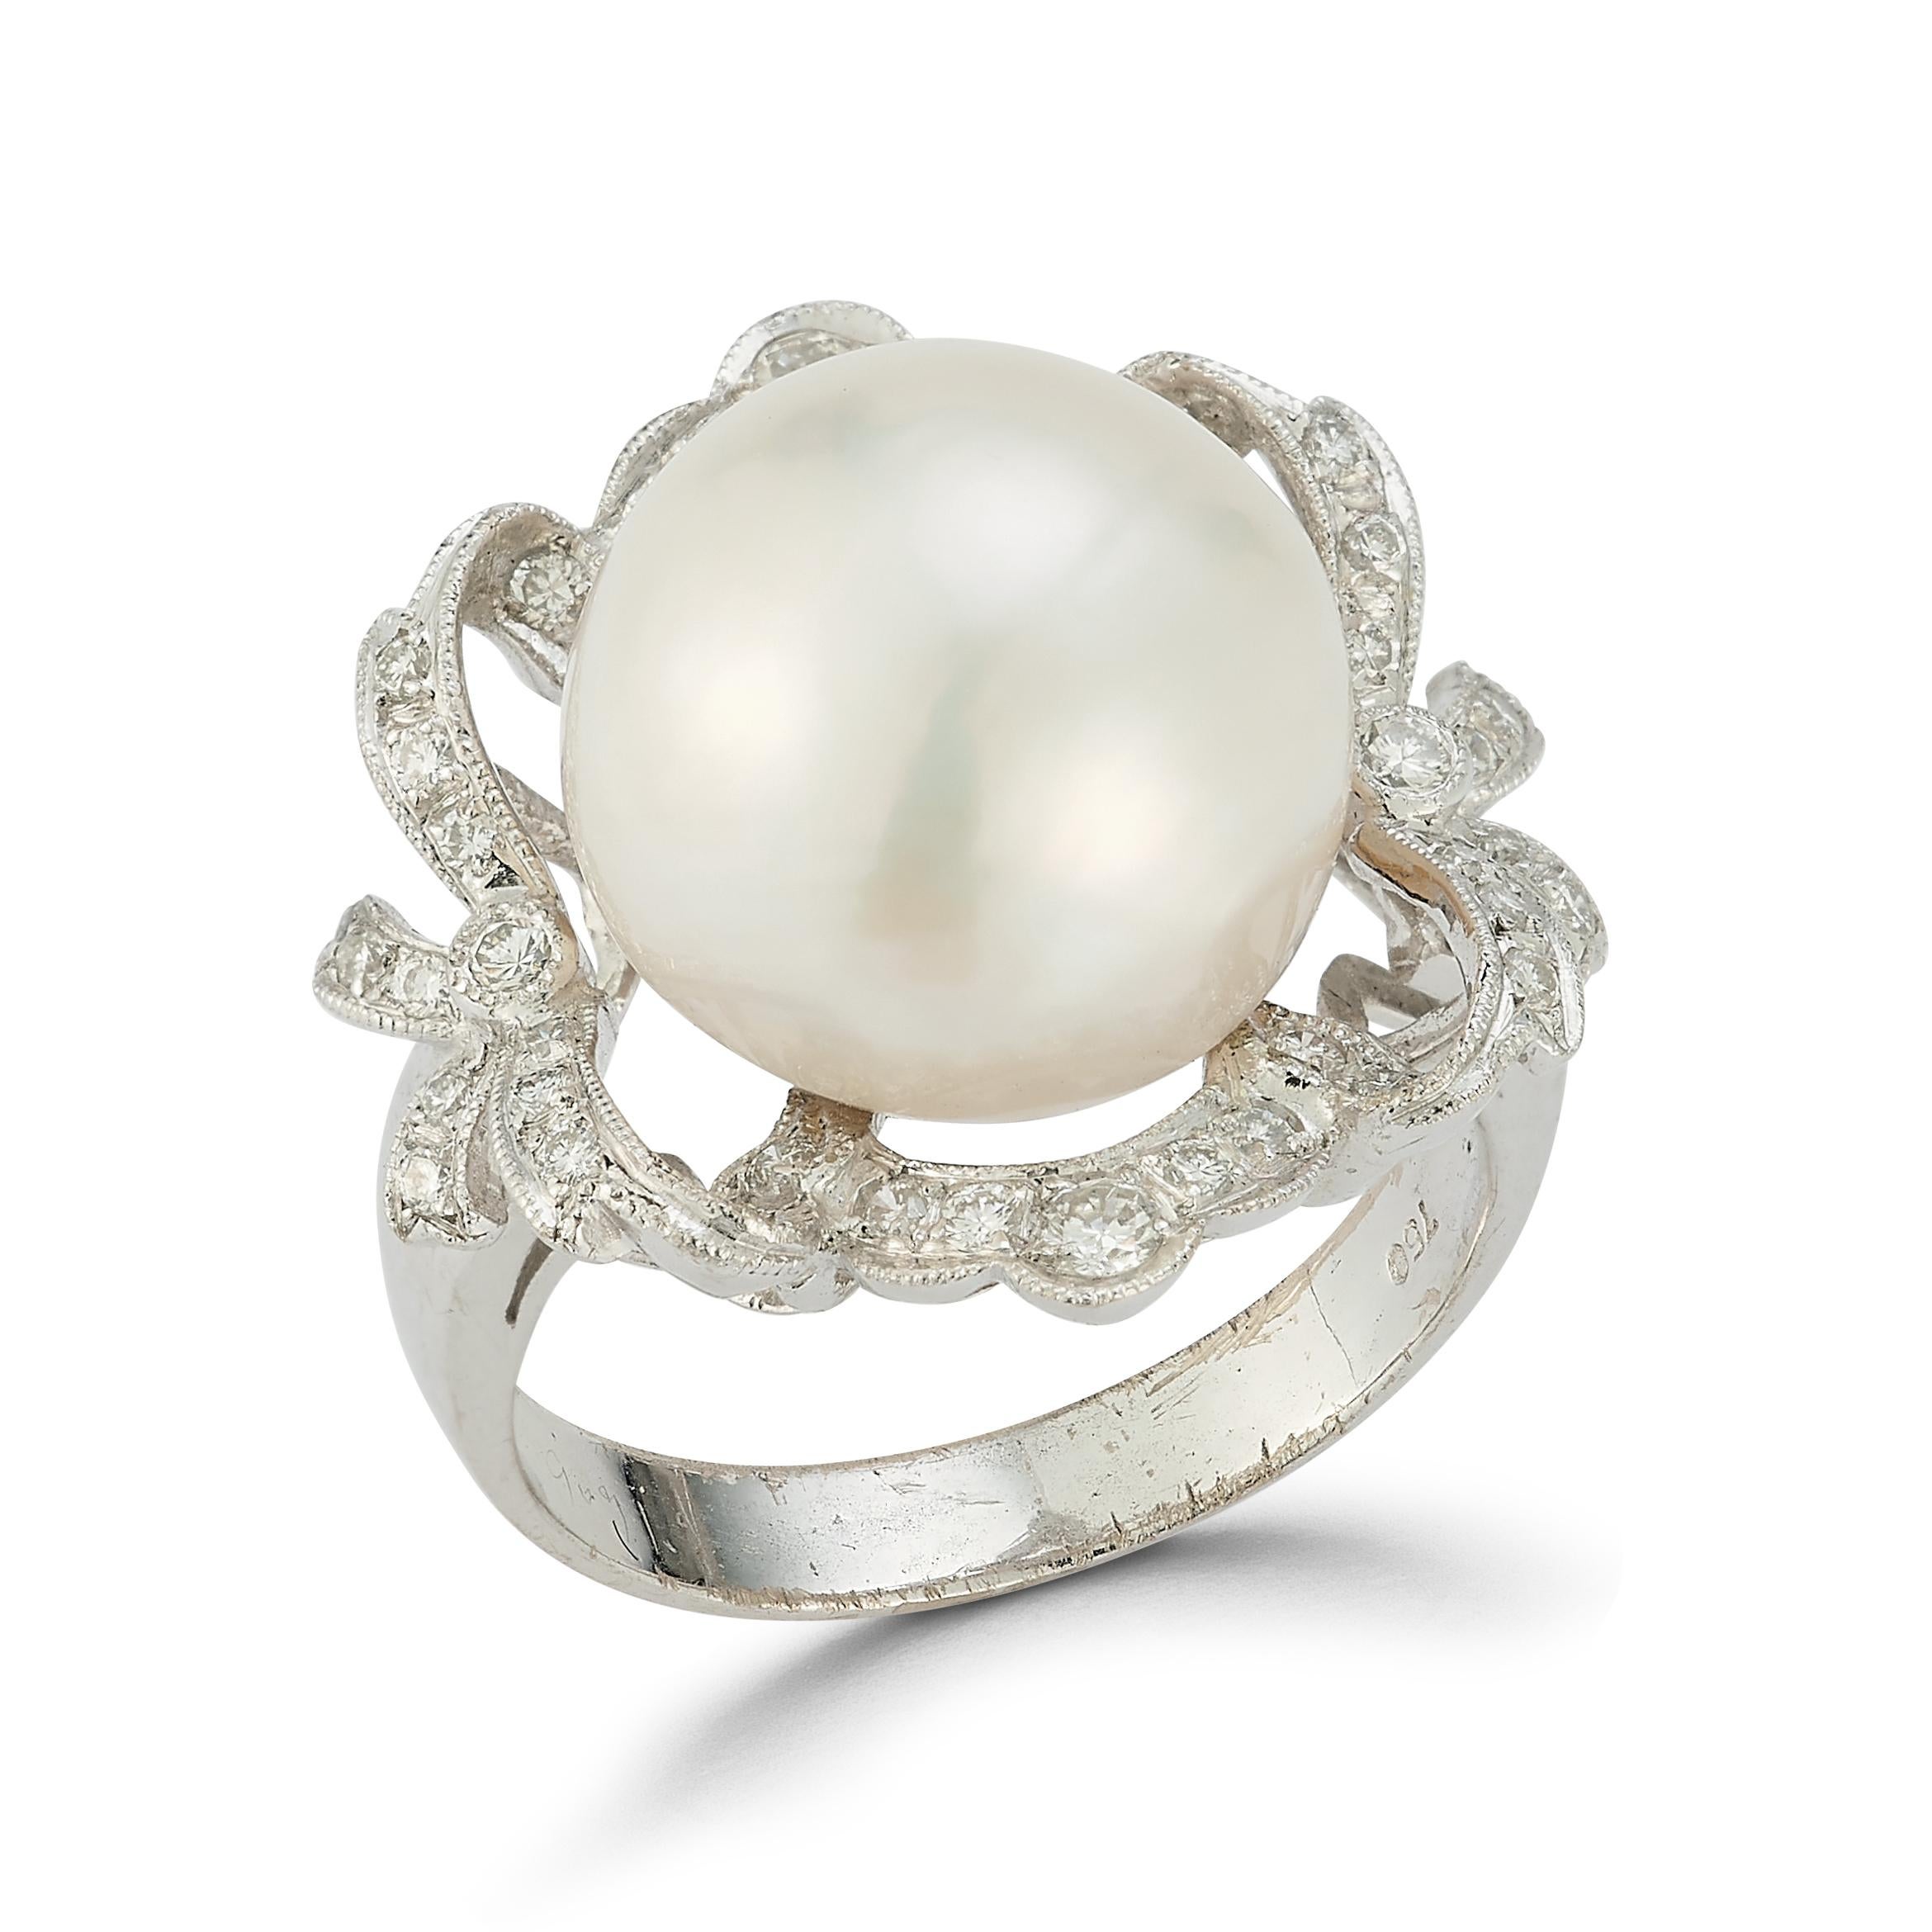 Pearl & Diamond Ring

An 18 karat white gold ring set with a pearl framed by round cut diamonds

Ring Size: 7

Resizable free of charge